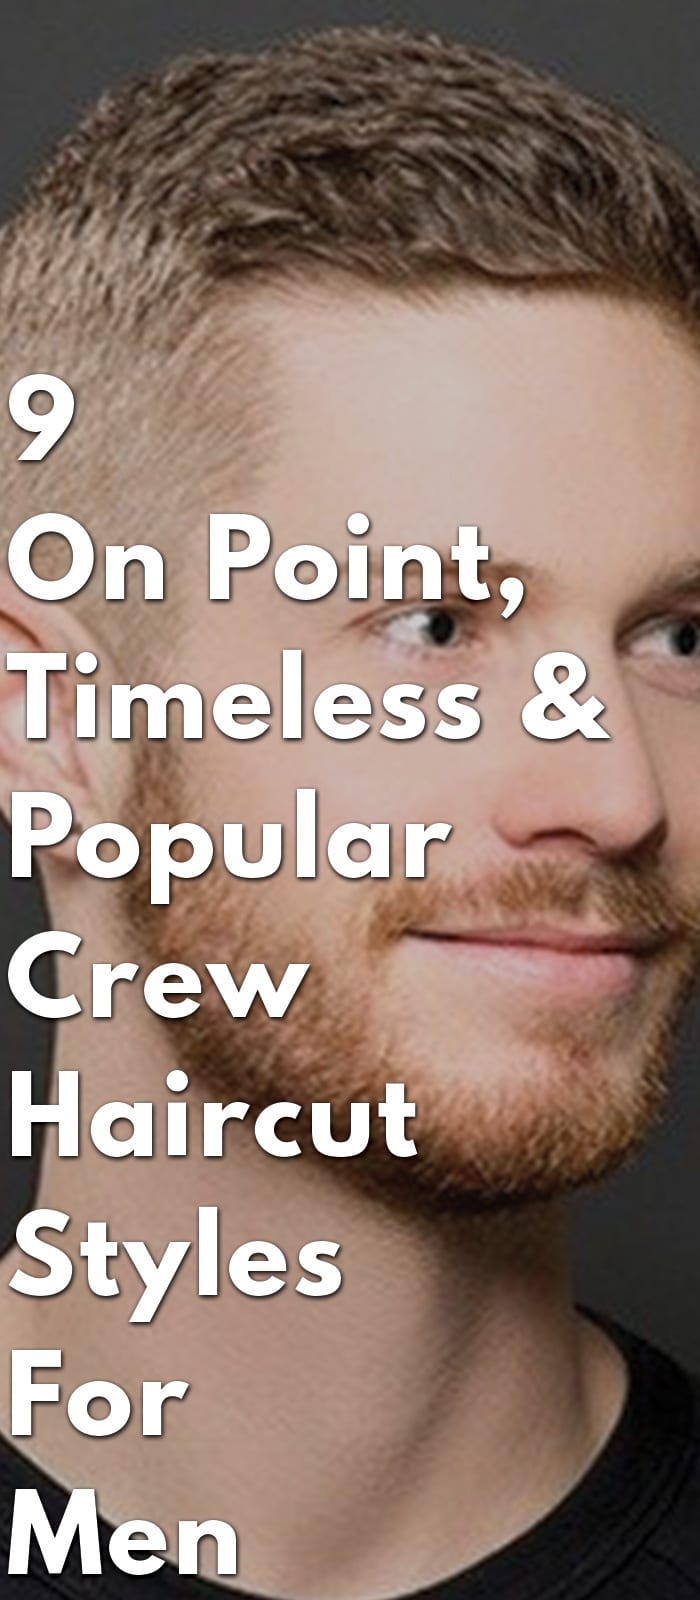 9-On-Point,-Timeless-&-Popular-Crew-Haircut-Styles-For-Men